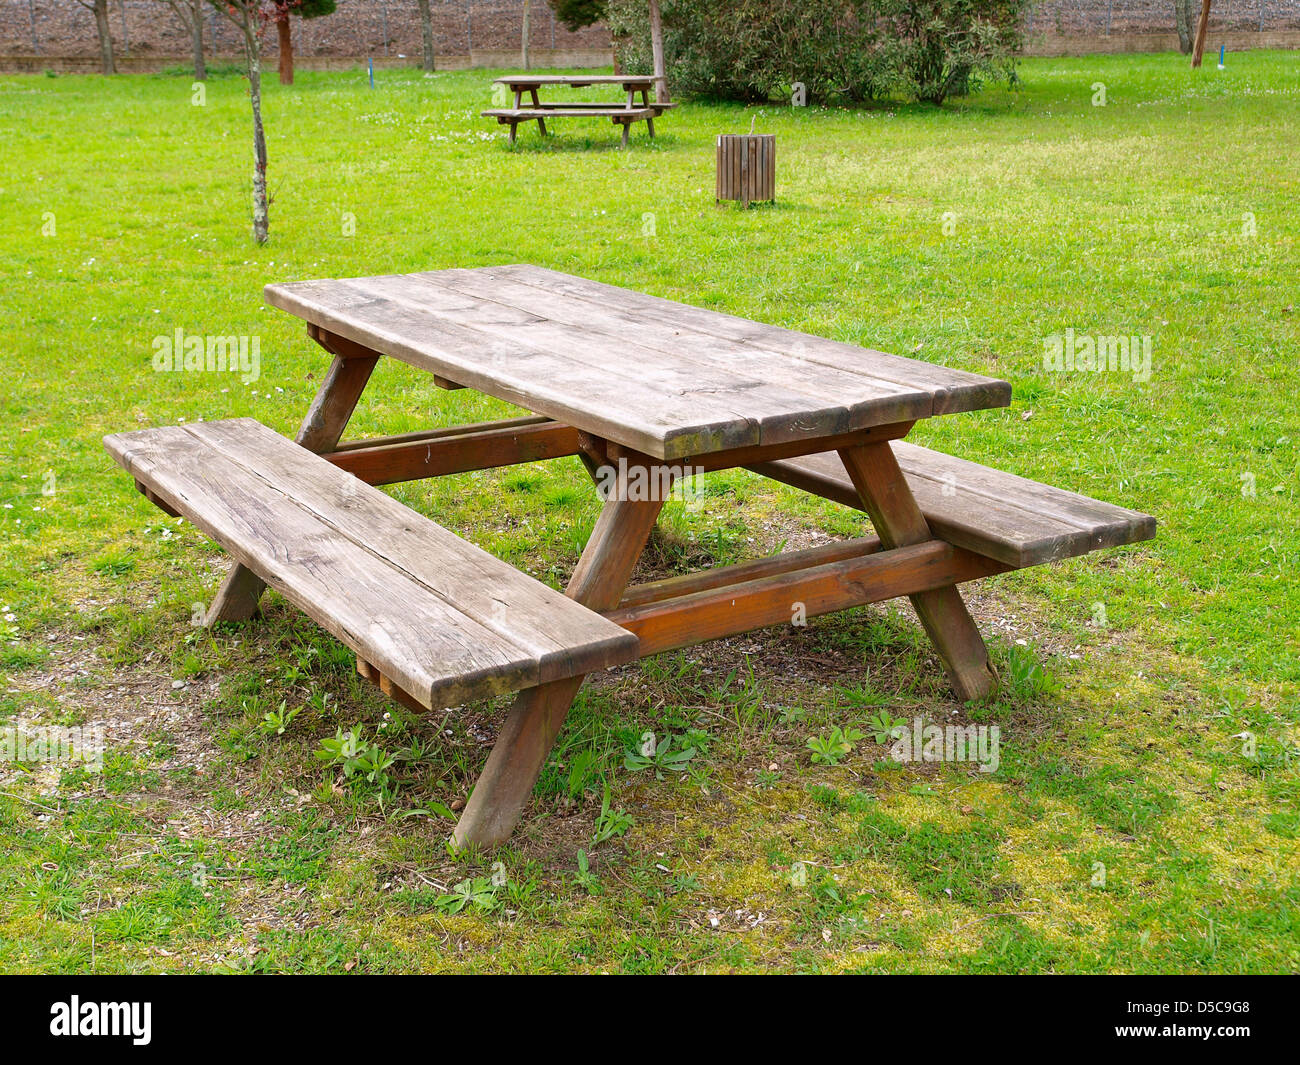 Table And Benchs In A Park An Outdoor Scene Stock Photo Alamy